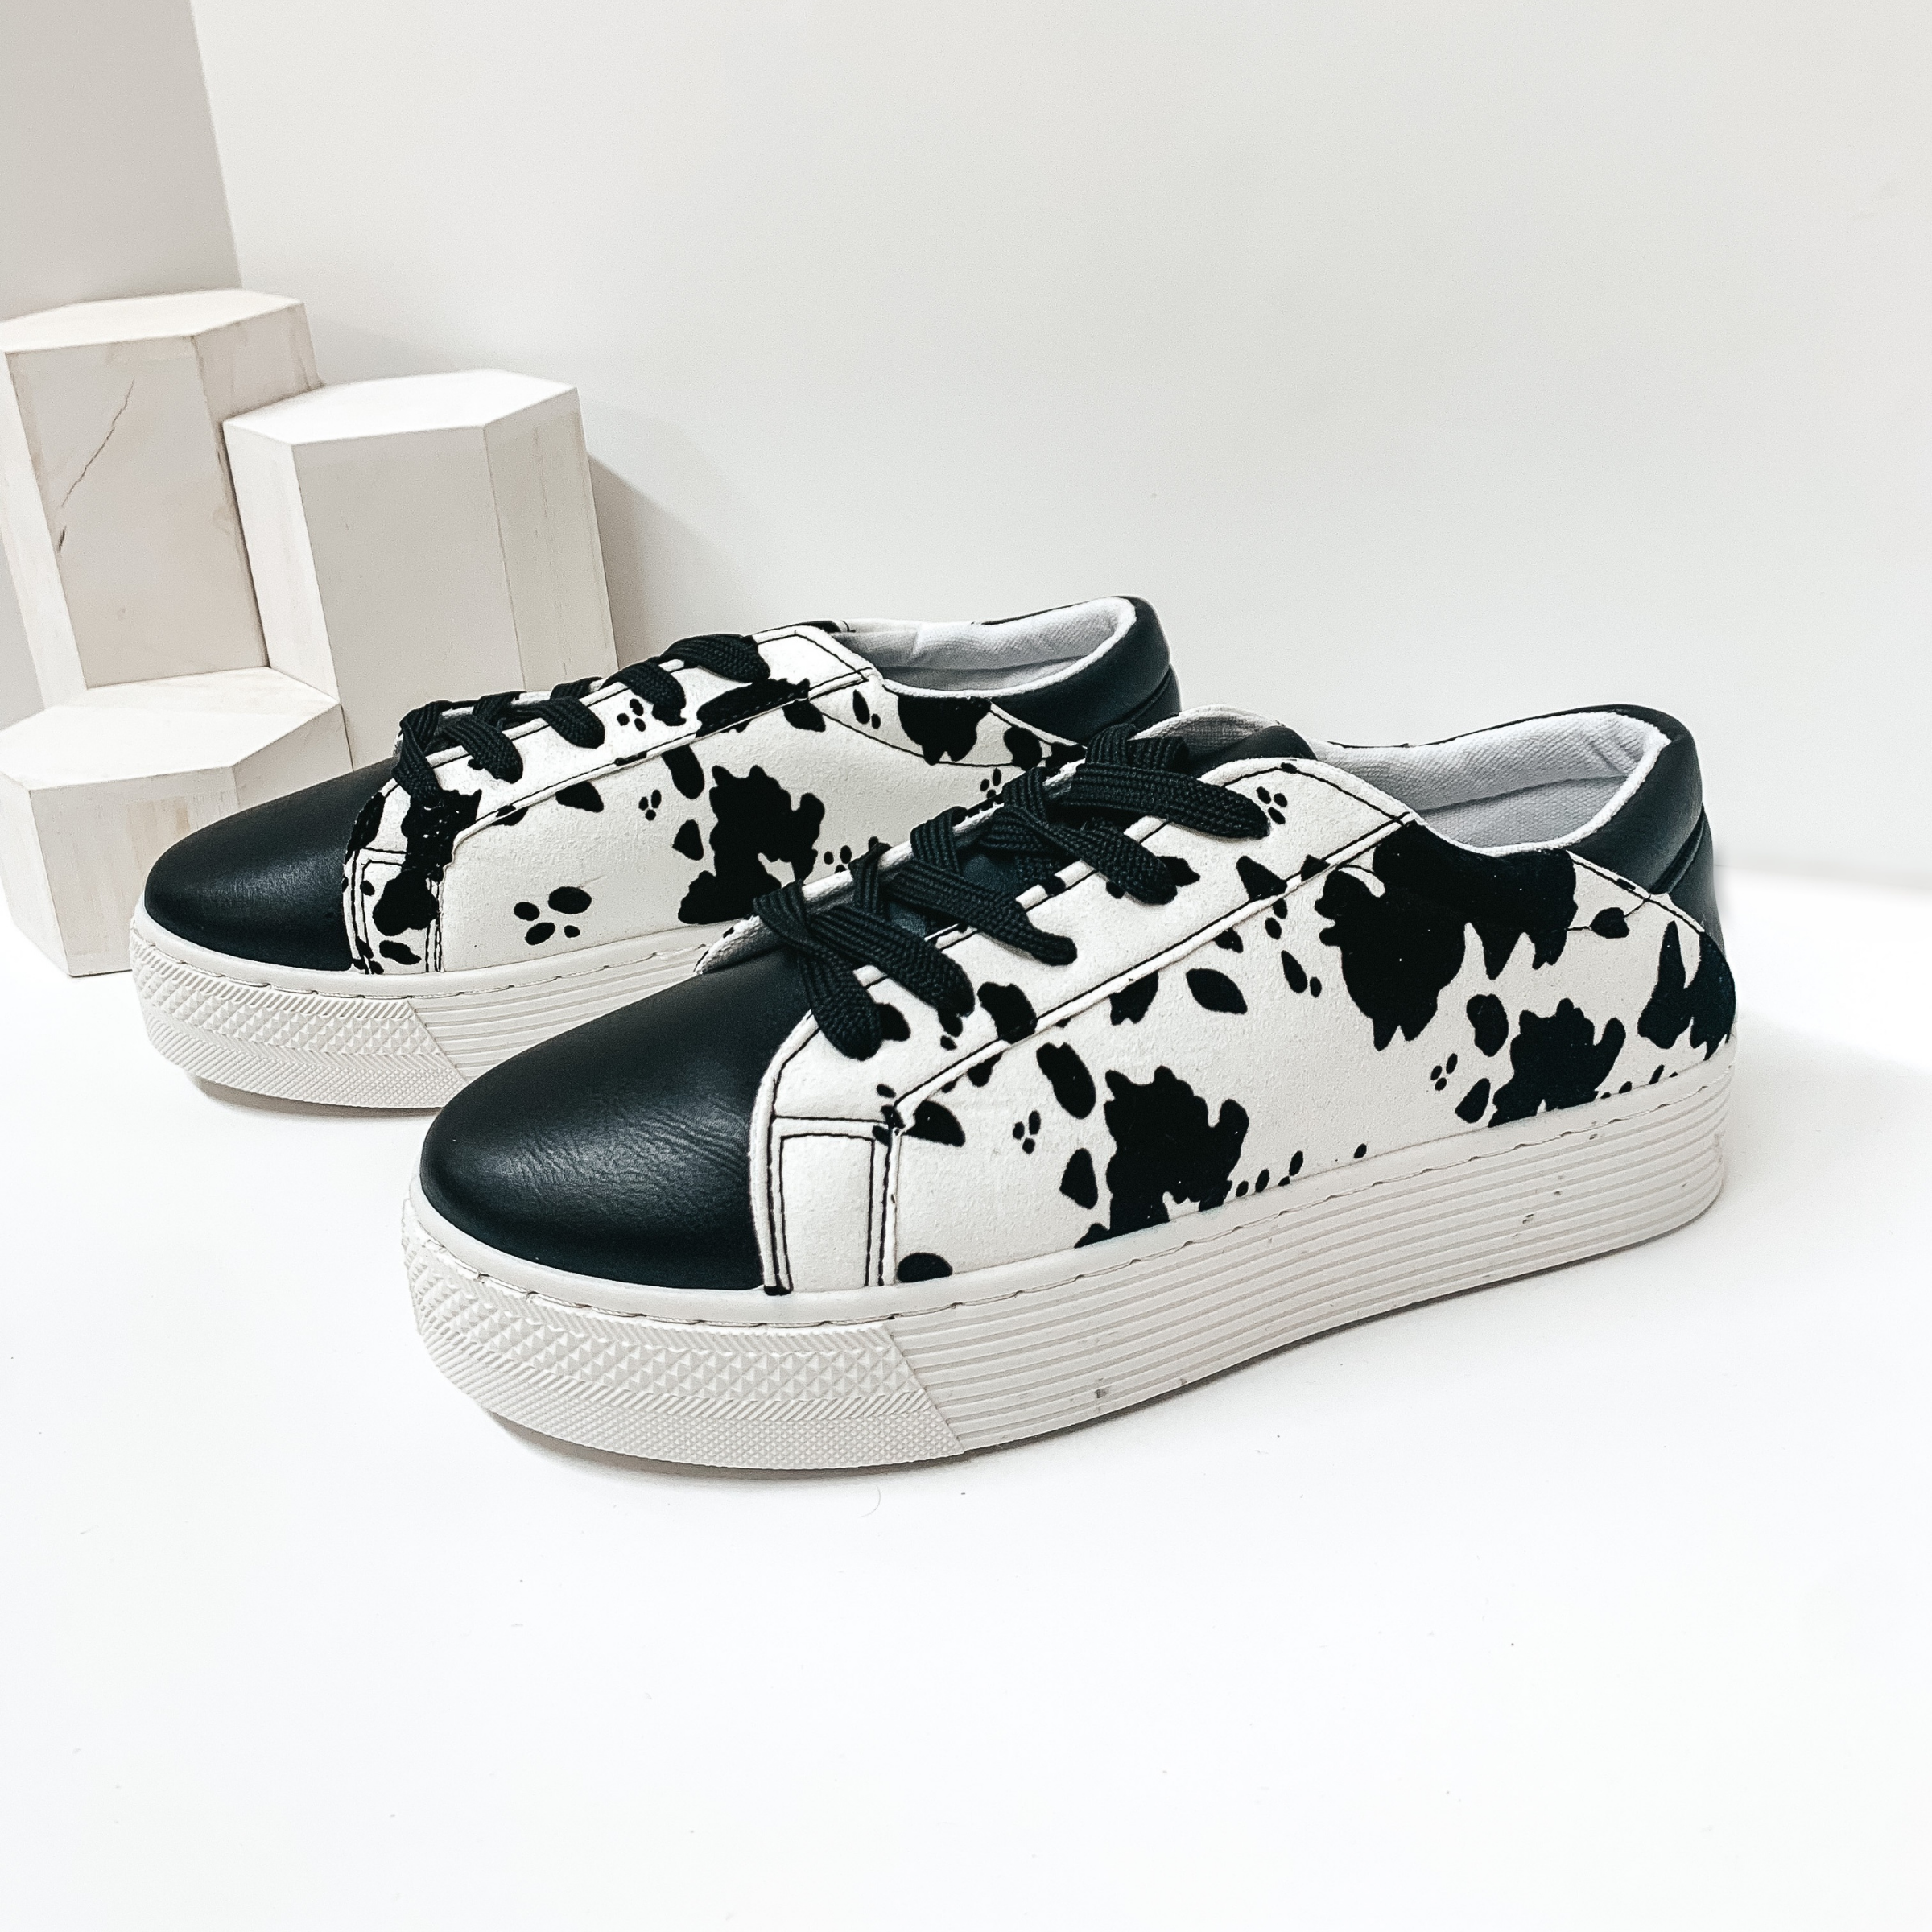 Casually Chic Lace Up Platform Sneakers in Cow Print - Giddy Up Glamour Boutique